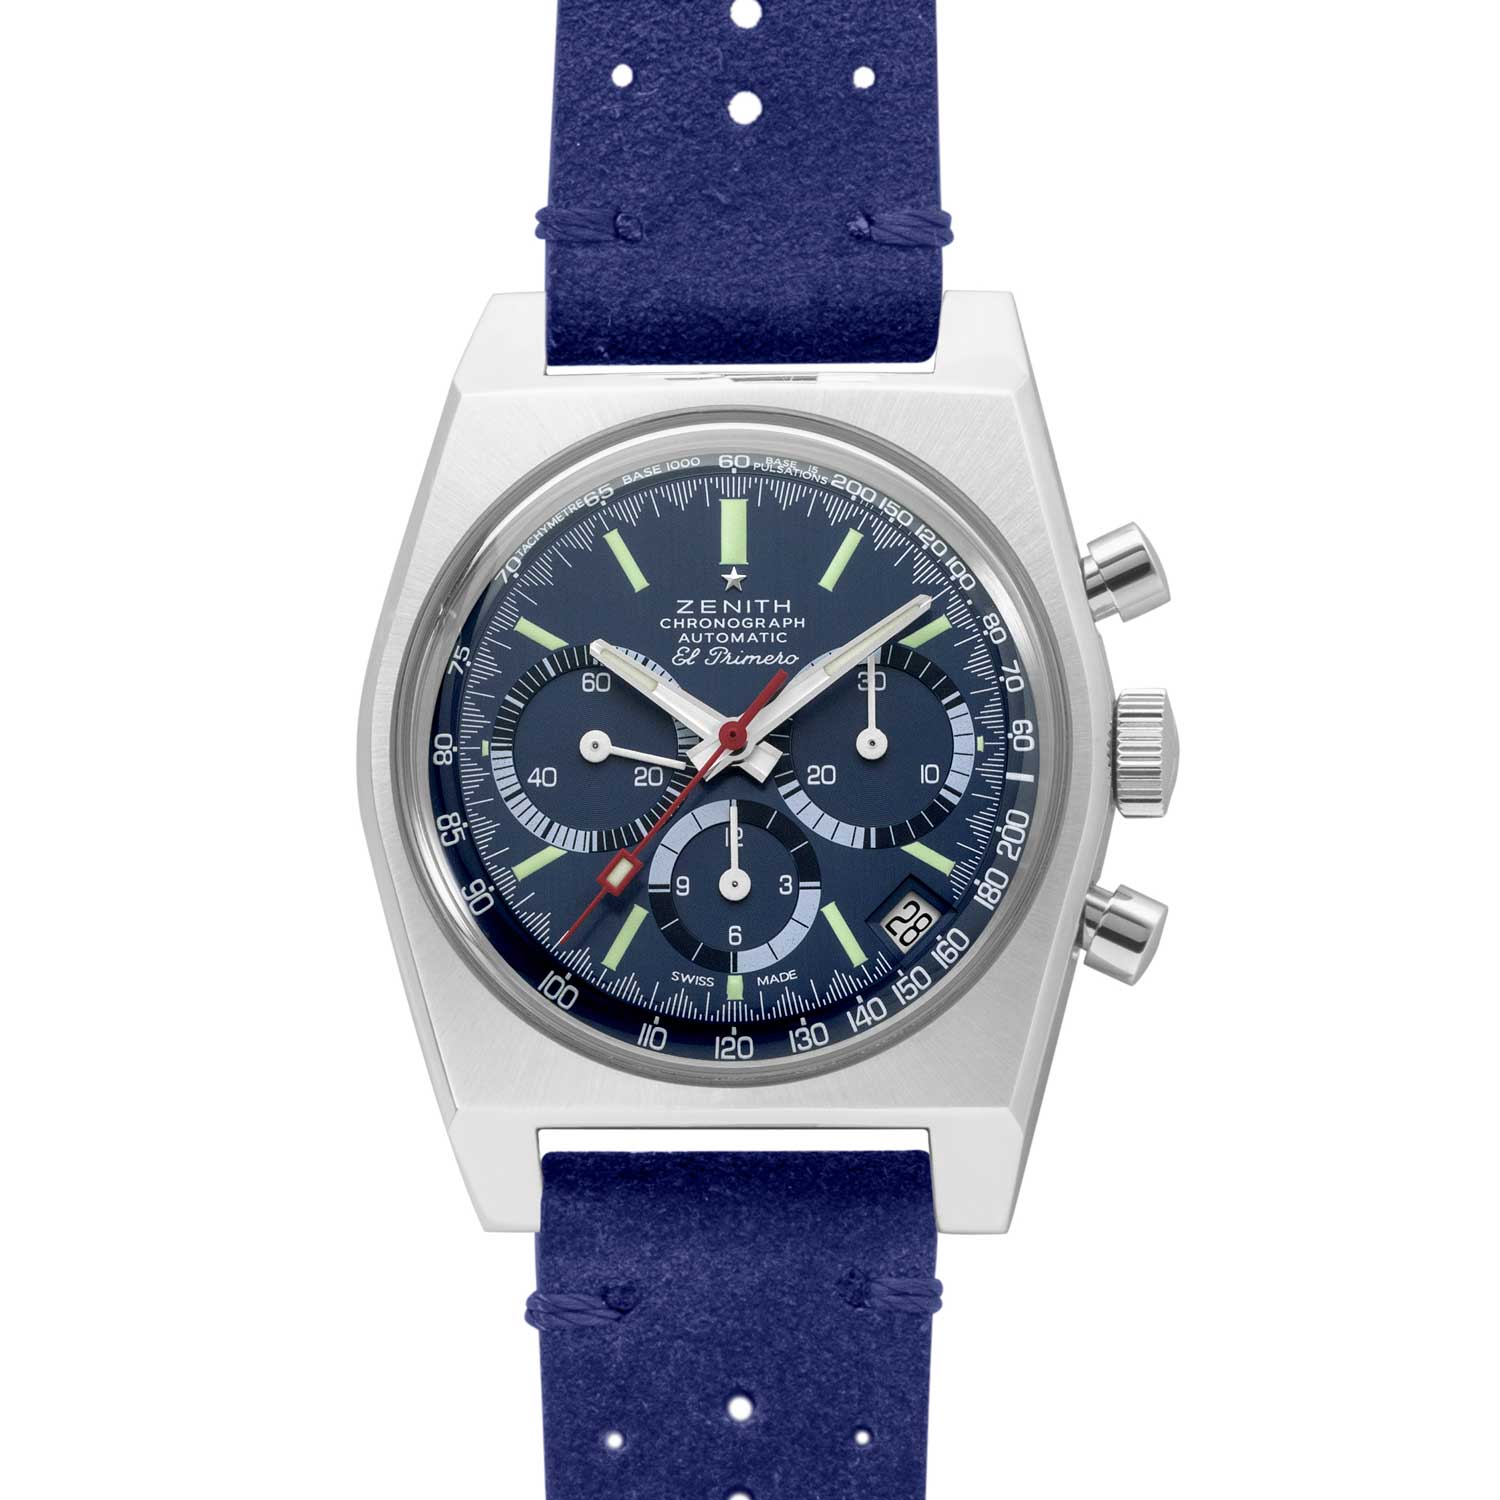 Zenith x Revolution Chronomaster Revival Ref. A3818 “Cover Girl” on a navy suede strap (Image © Revolution)